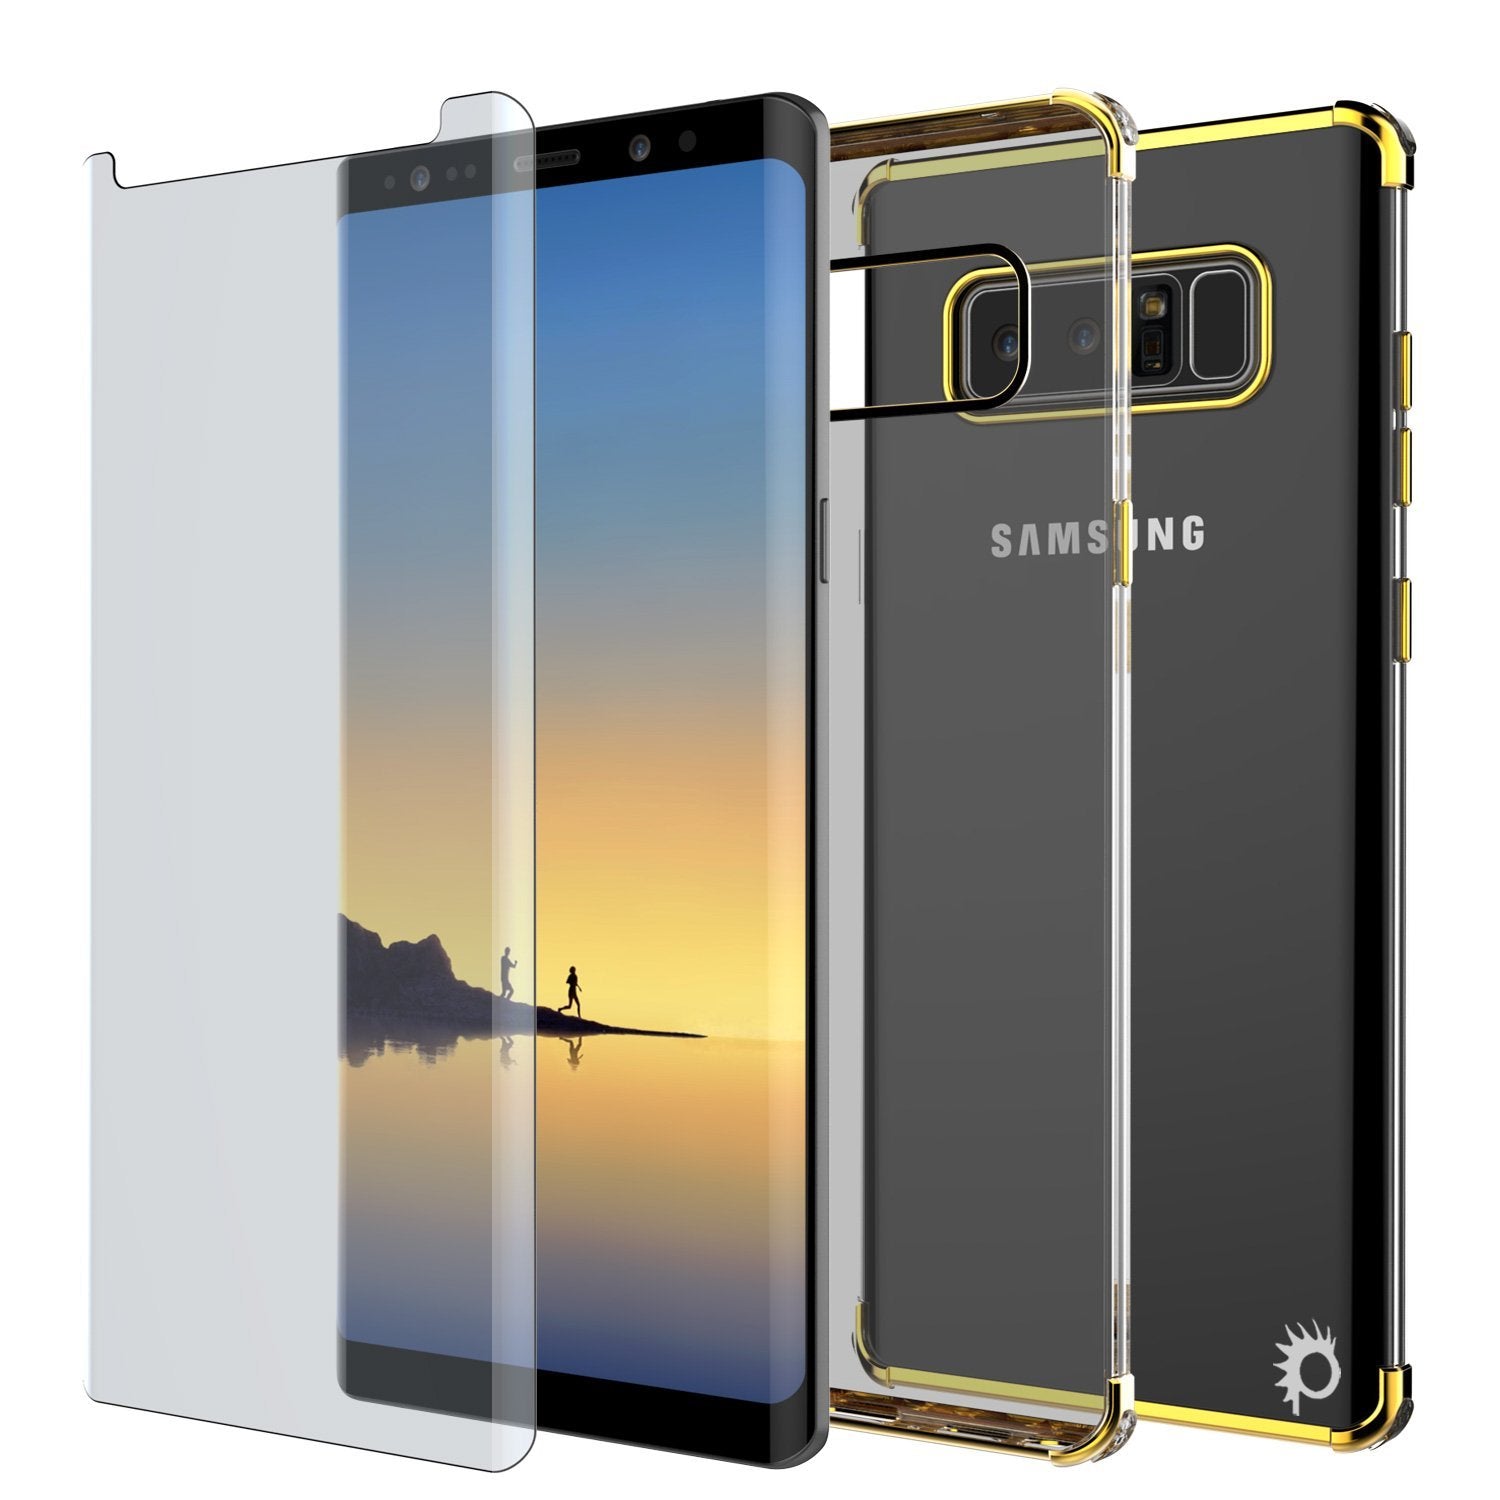 Galaxy Note 8 Punkcase Slim-Fit Case W/ Screen Protector Cover [Gold]